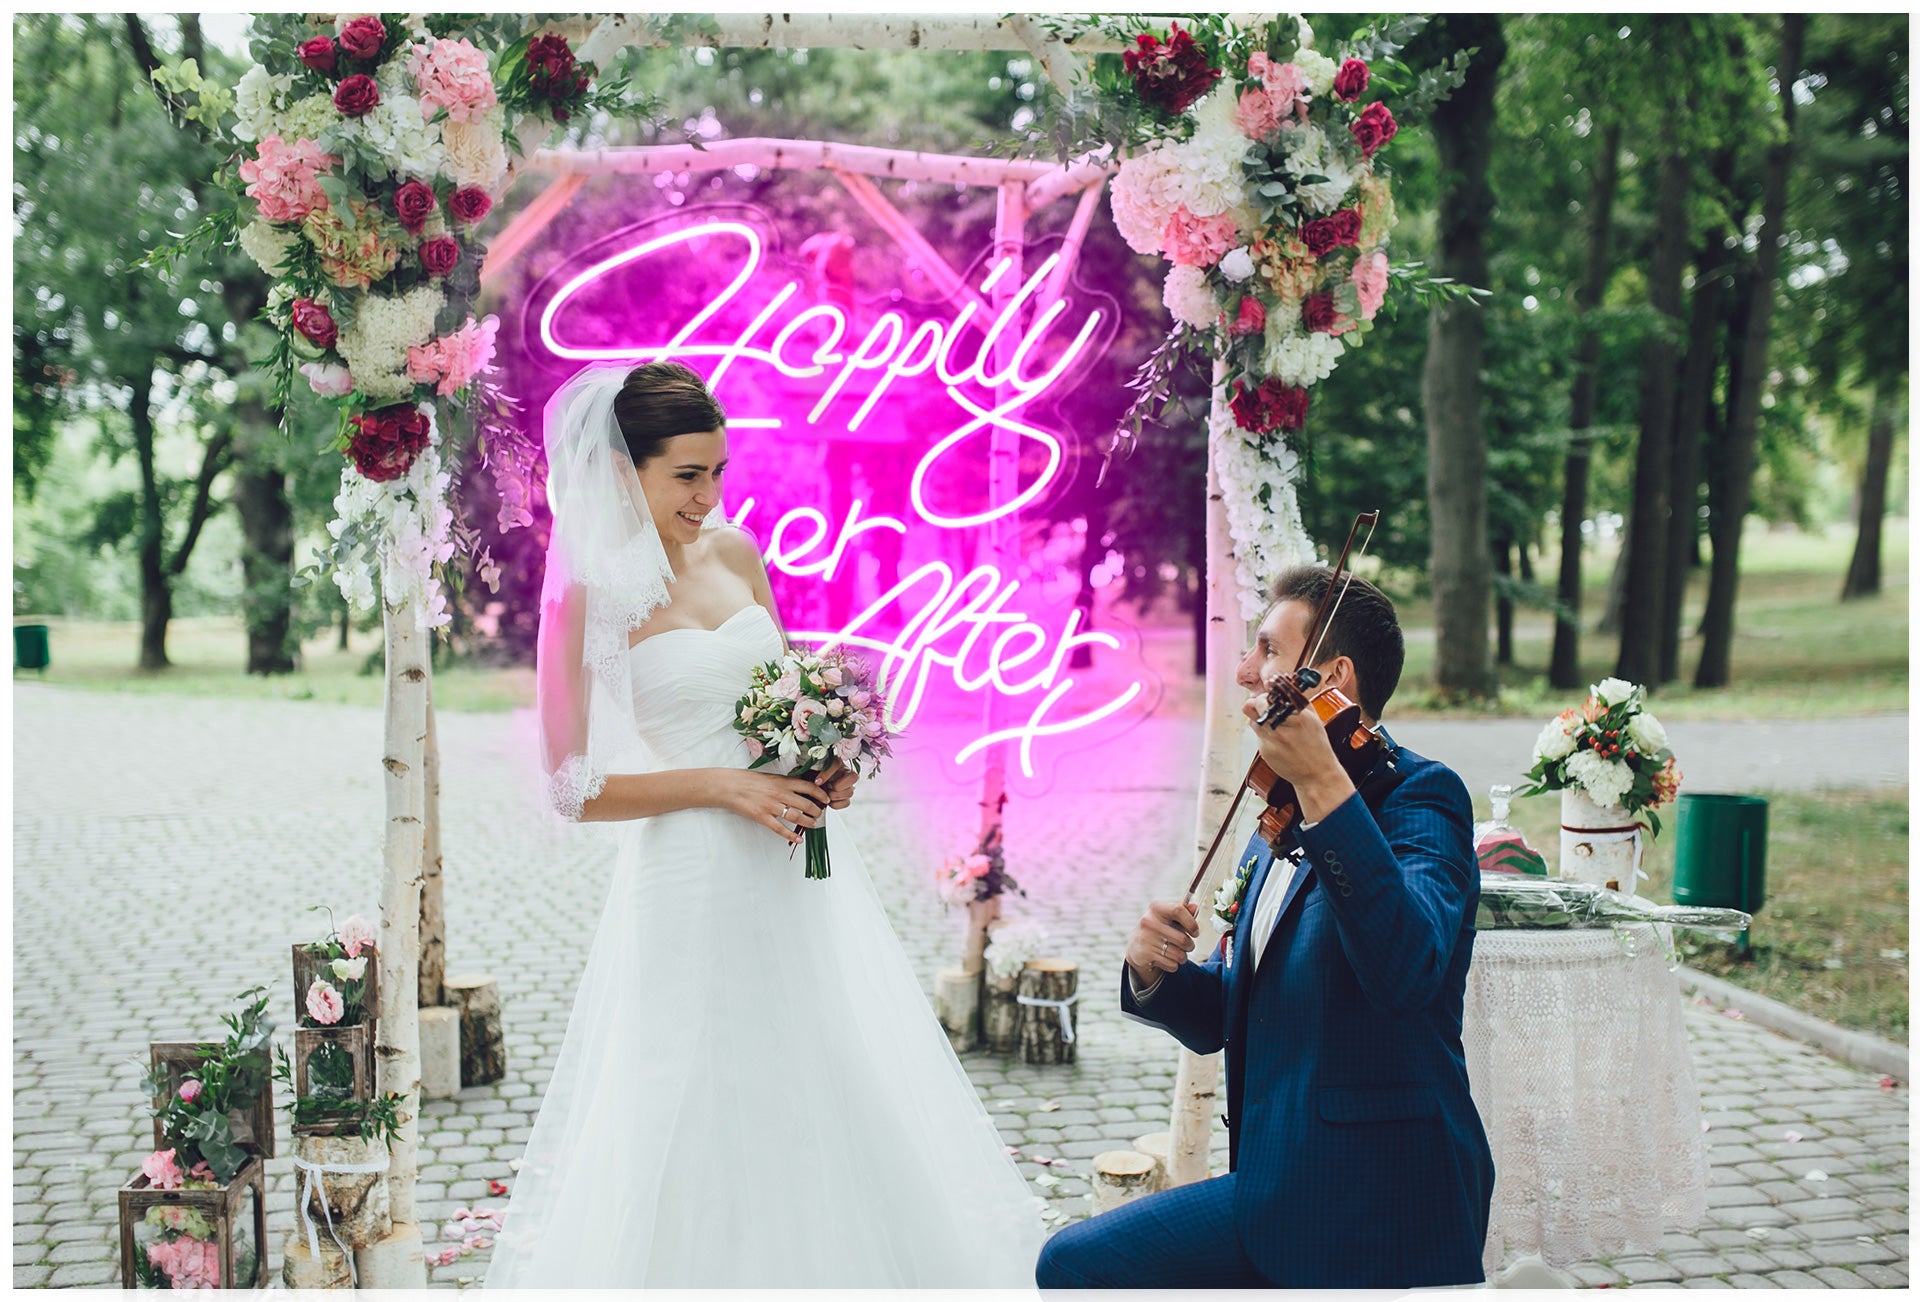 neon happily ever after sign